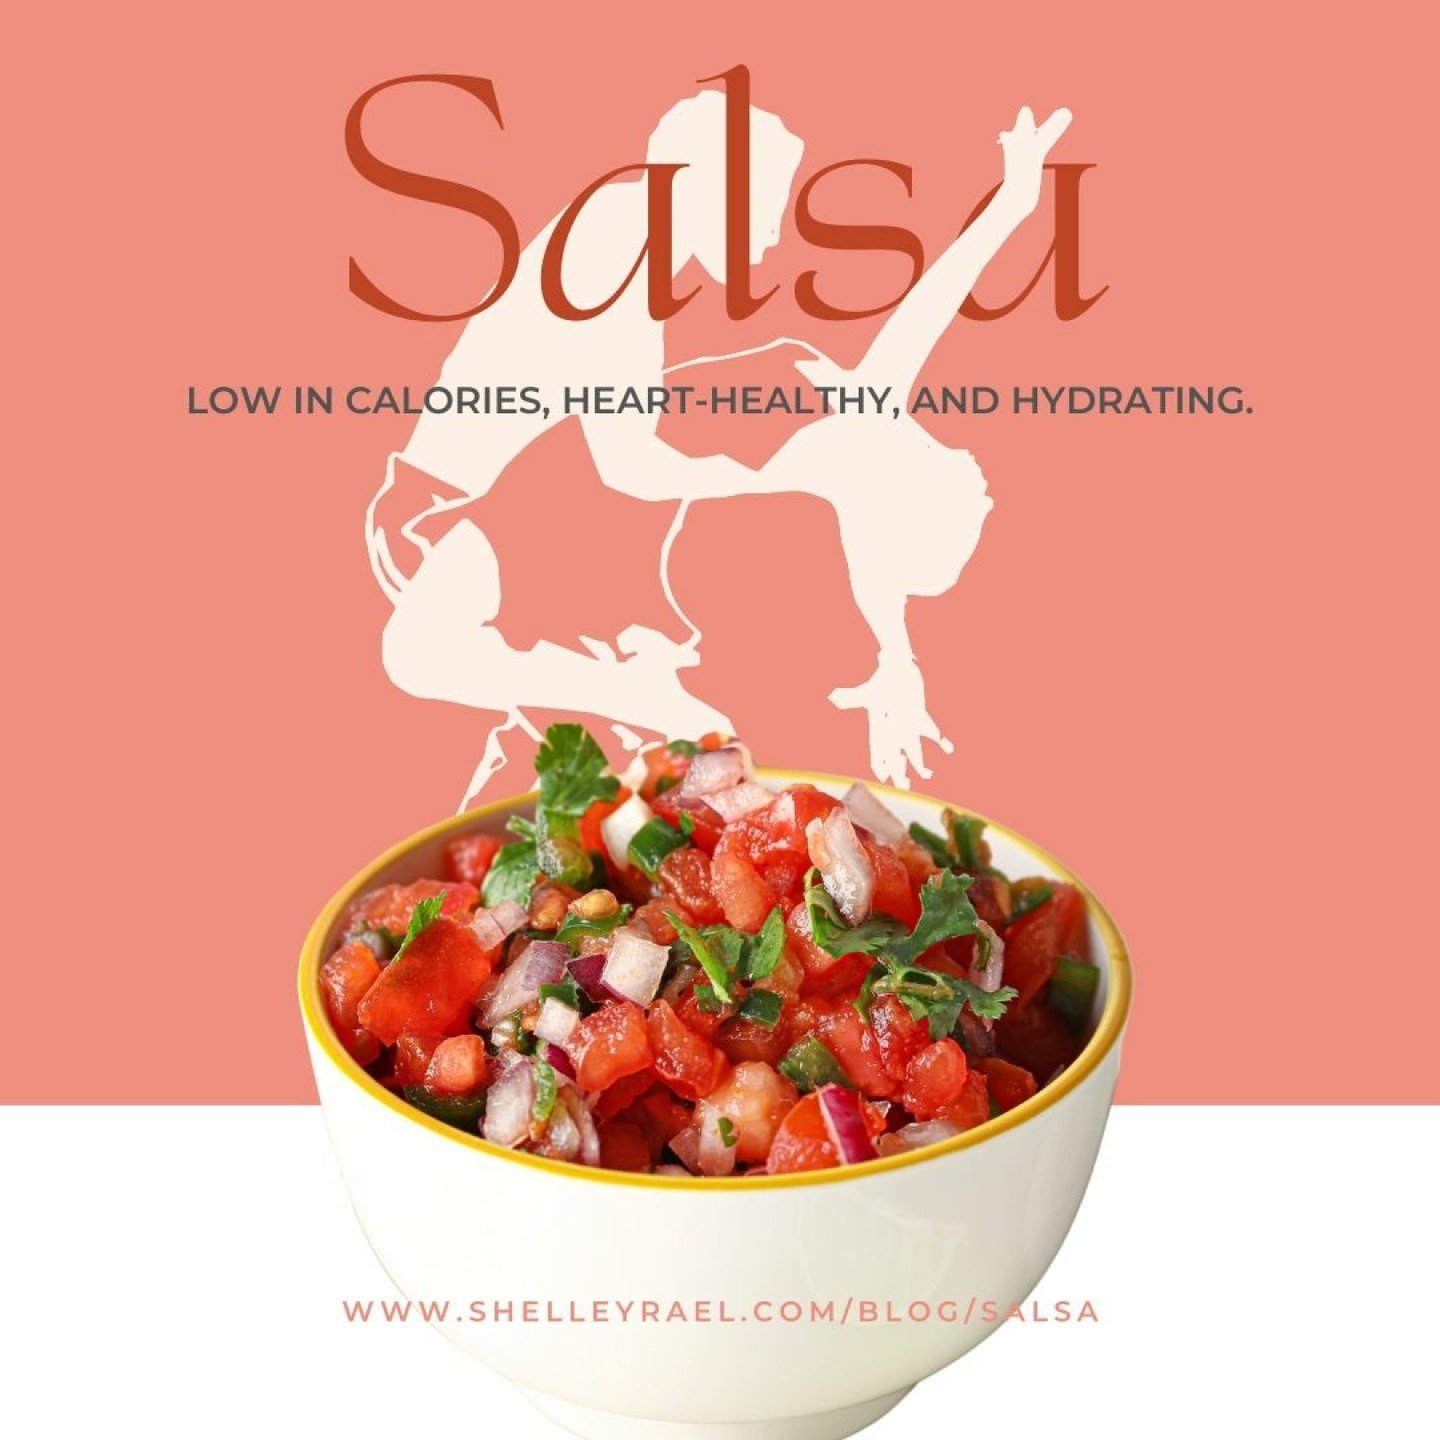 🌶️ As people celebrate Cinco de Mayo this weekend (do they know what that is?) I use this as an opportunity to explore the vibrant flavors of salsa!

🍅Of course, the classic version is tomato-based and has ancient origins, yet is still popular toda